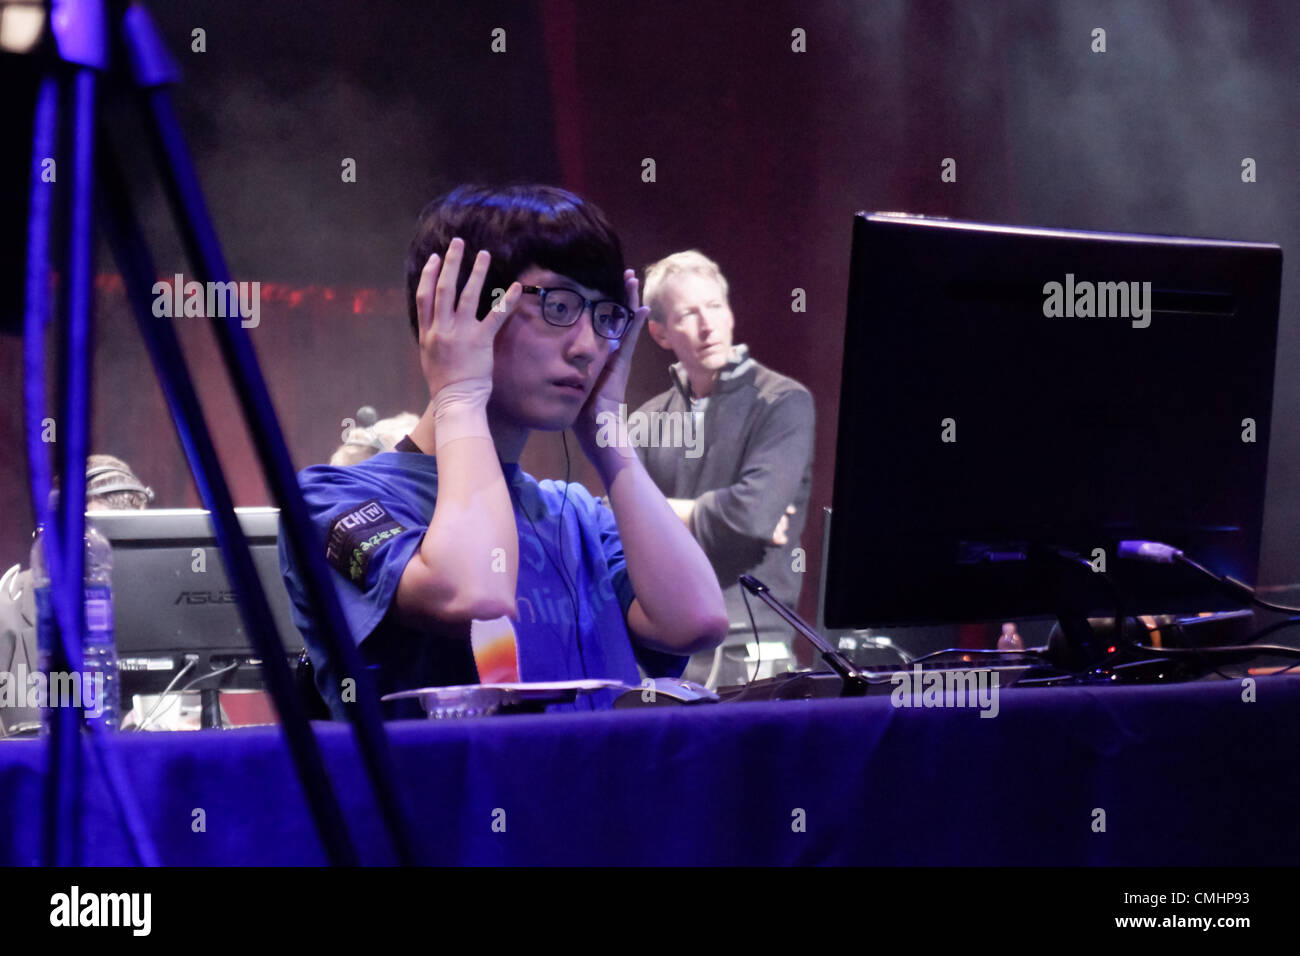 August 11, 2012. San Francisco, USA. IPL Faceoff, Starcraft 2 Team League Arena at Masonic Center in San Francisco. Liquid Taeja, MLG champion and current rising start of Starcraft 2, getting ready for his first game. Stock Photo